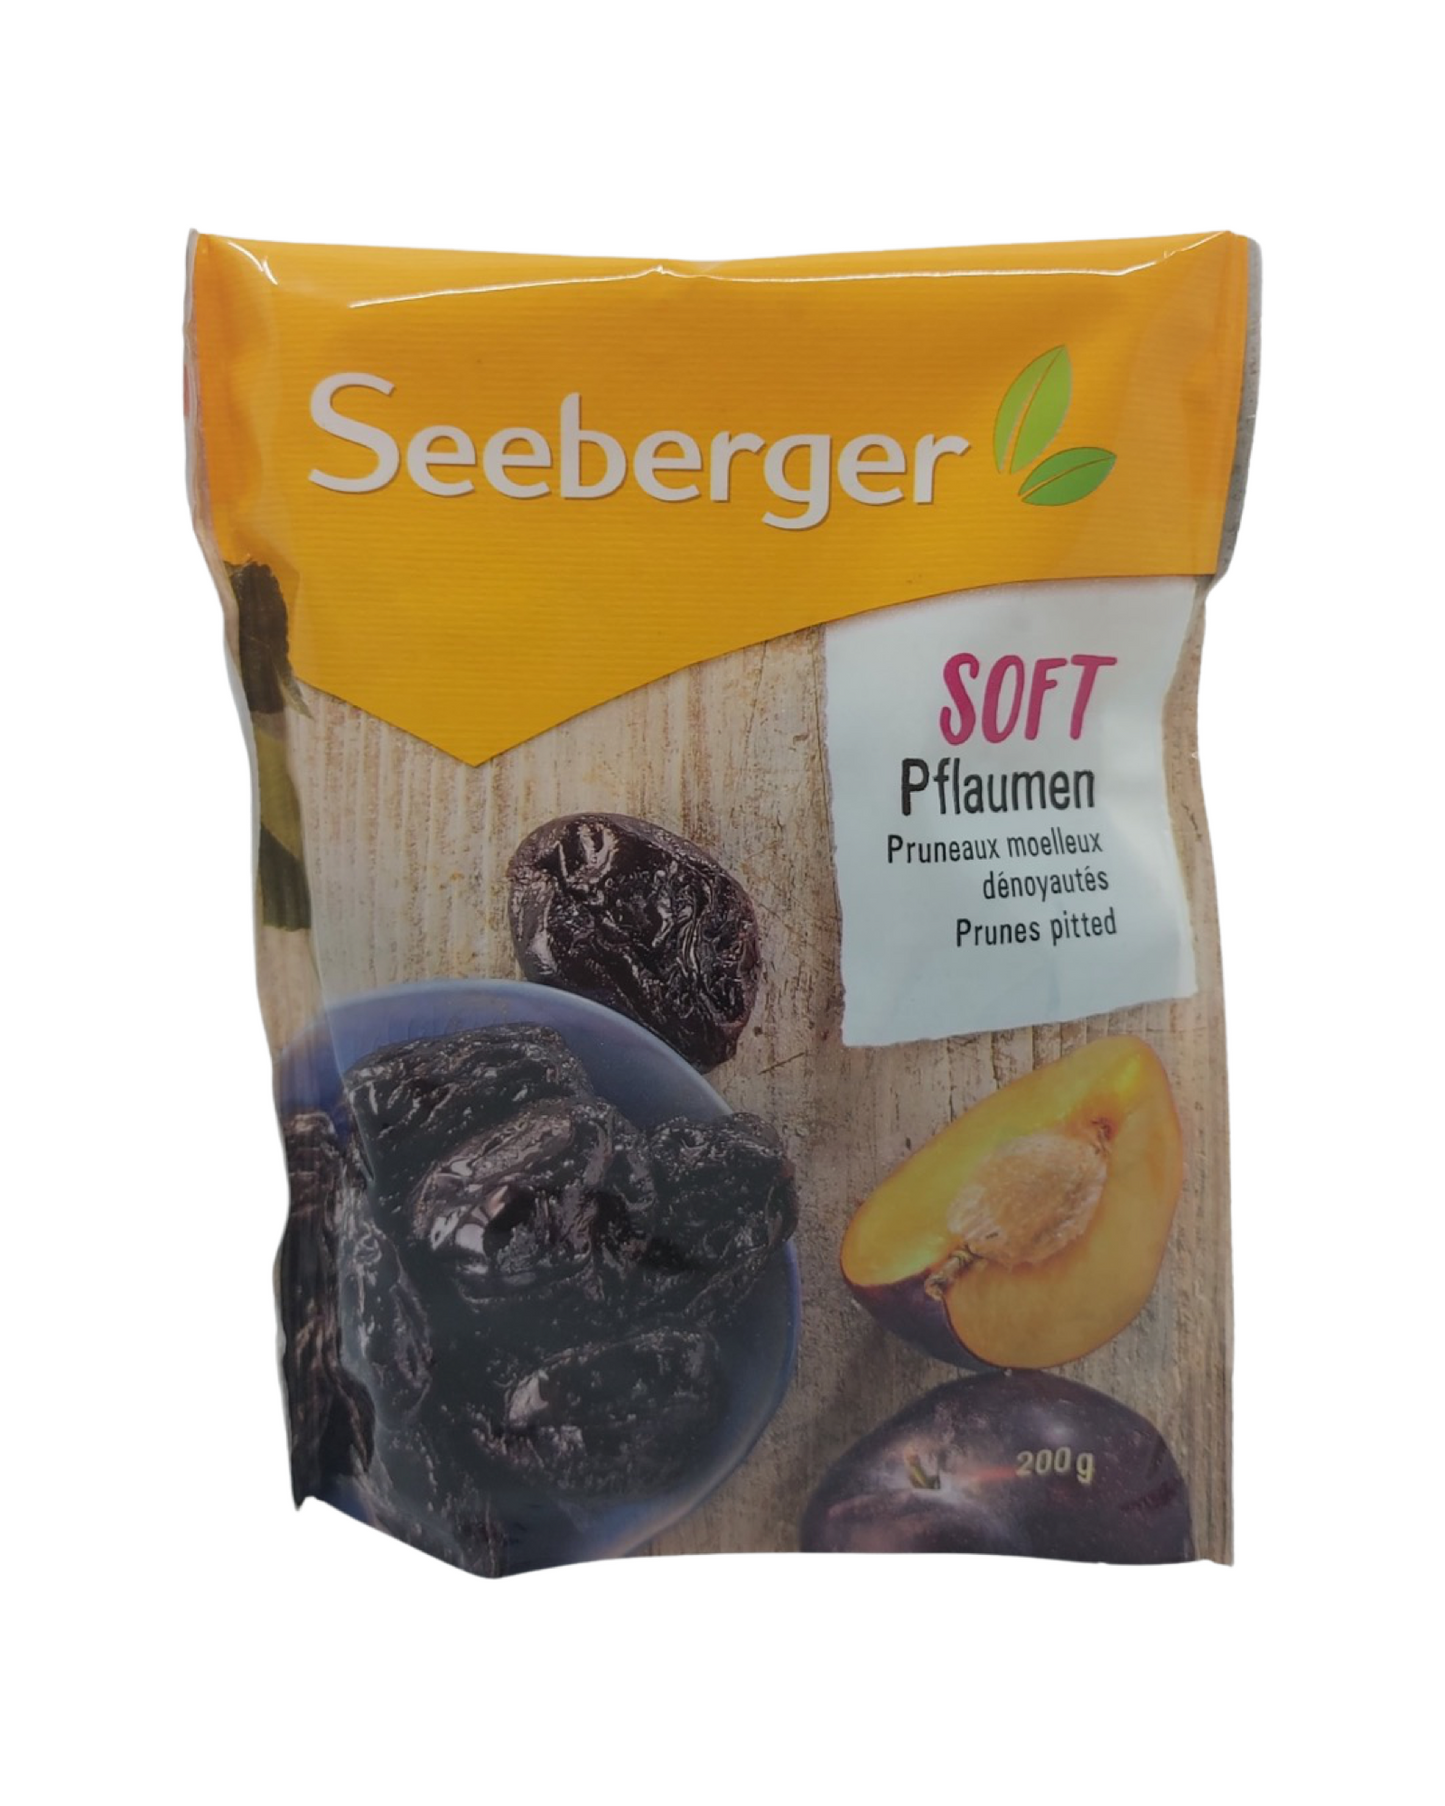 Prunes pitted (200g)